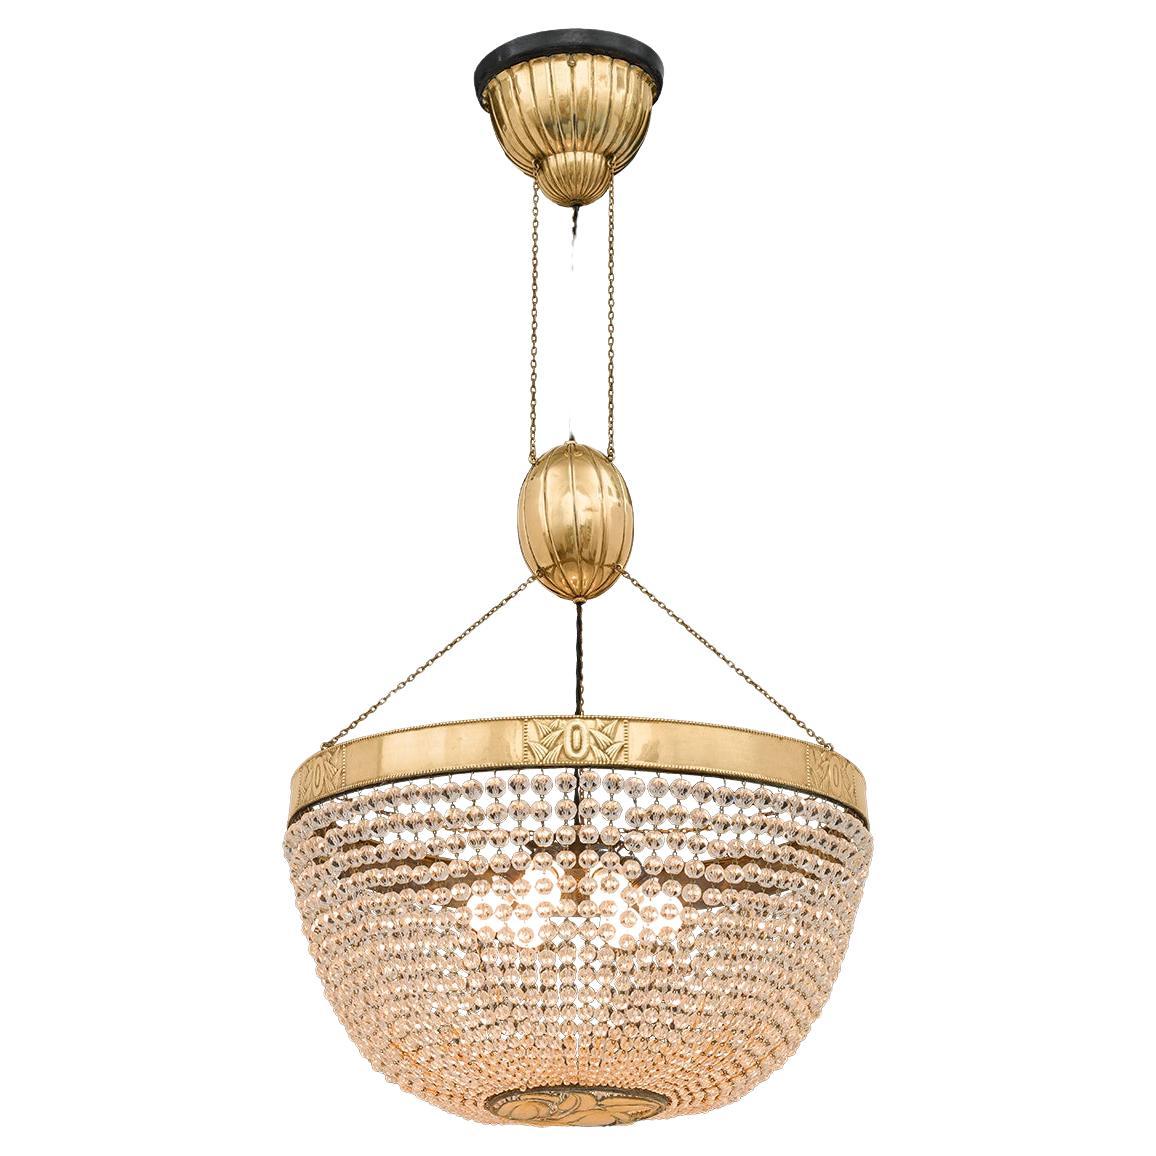 Wiener Werkstätte chased brass and glass Chandelier, Edition For Sale